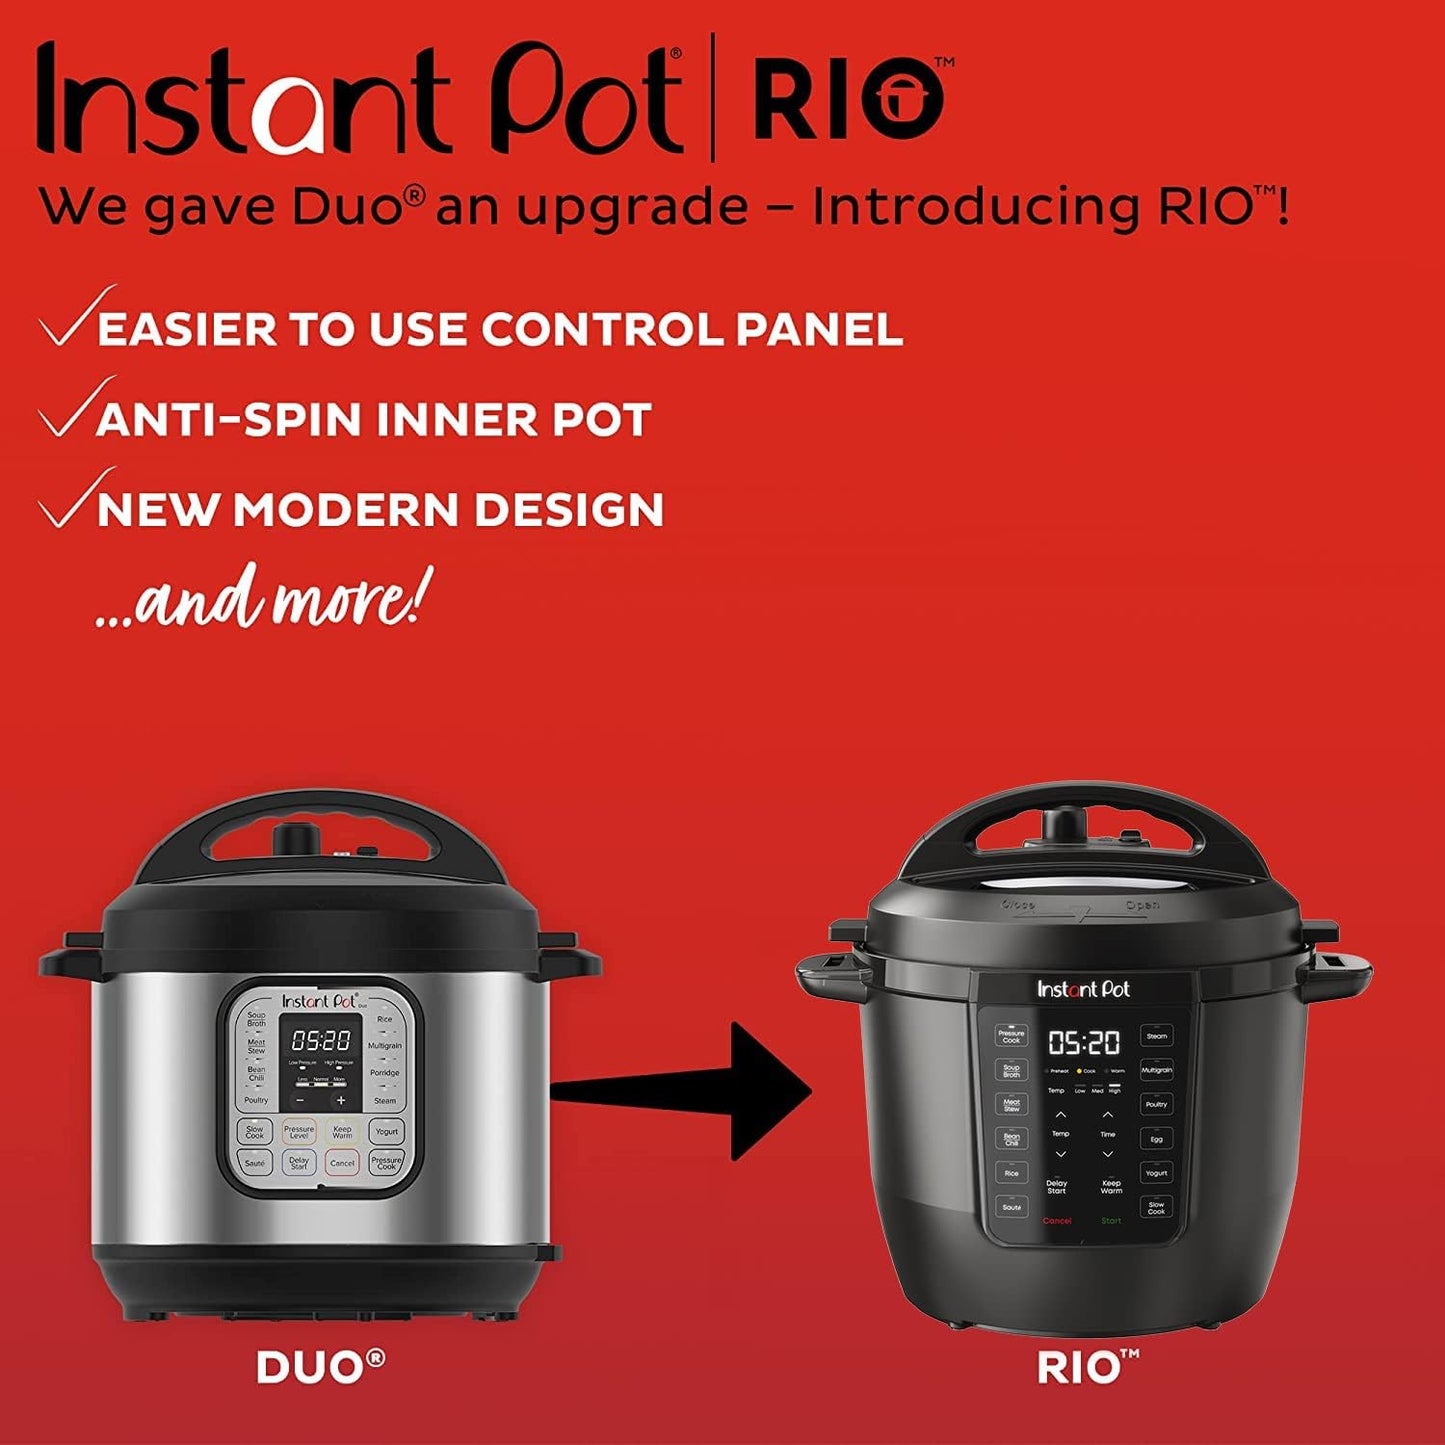 Instant Pot RIO, 7-in-1 Electric Multi-Cooker, Pressure Cooker, Slow Cooker, Rice Cooker, Steamer, Sauté, Yogurt Maker, & Warmer, Includes App With Over 800 Recipes, 6 Quart